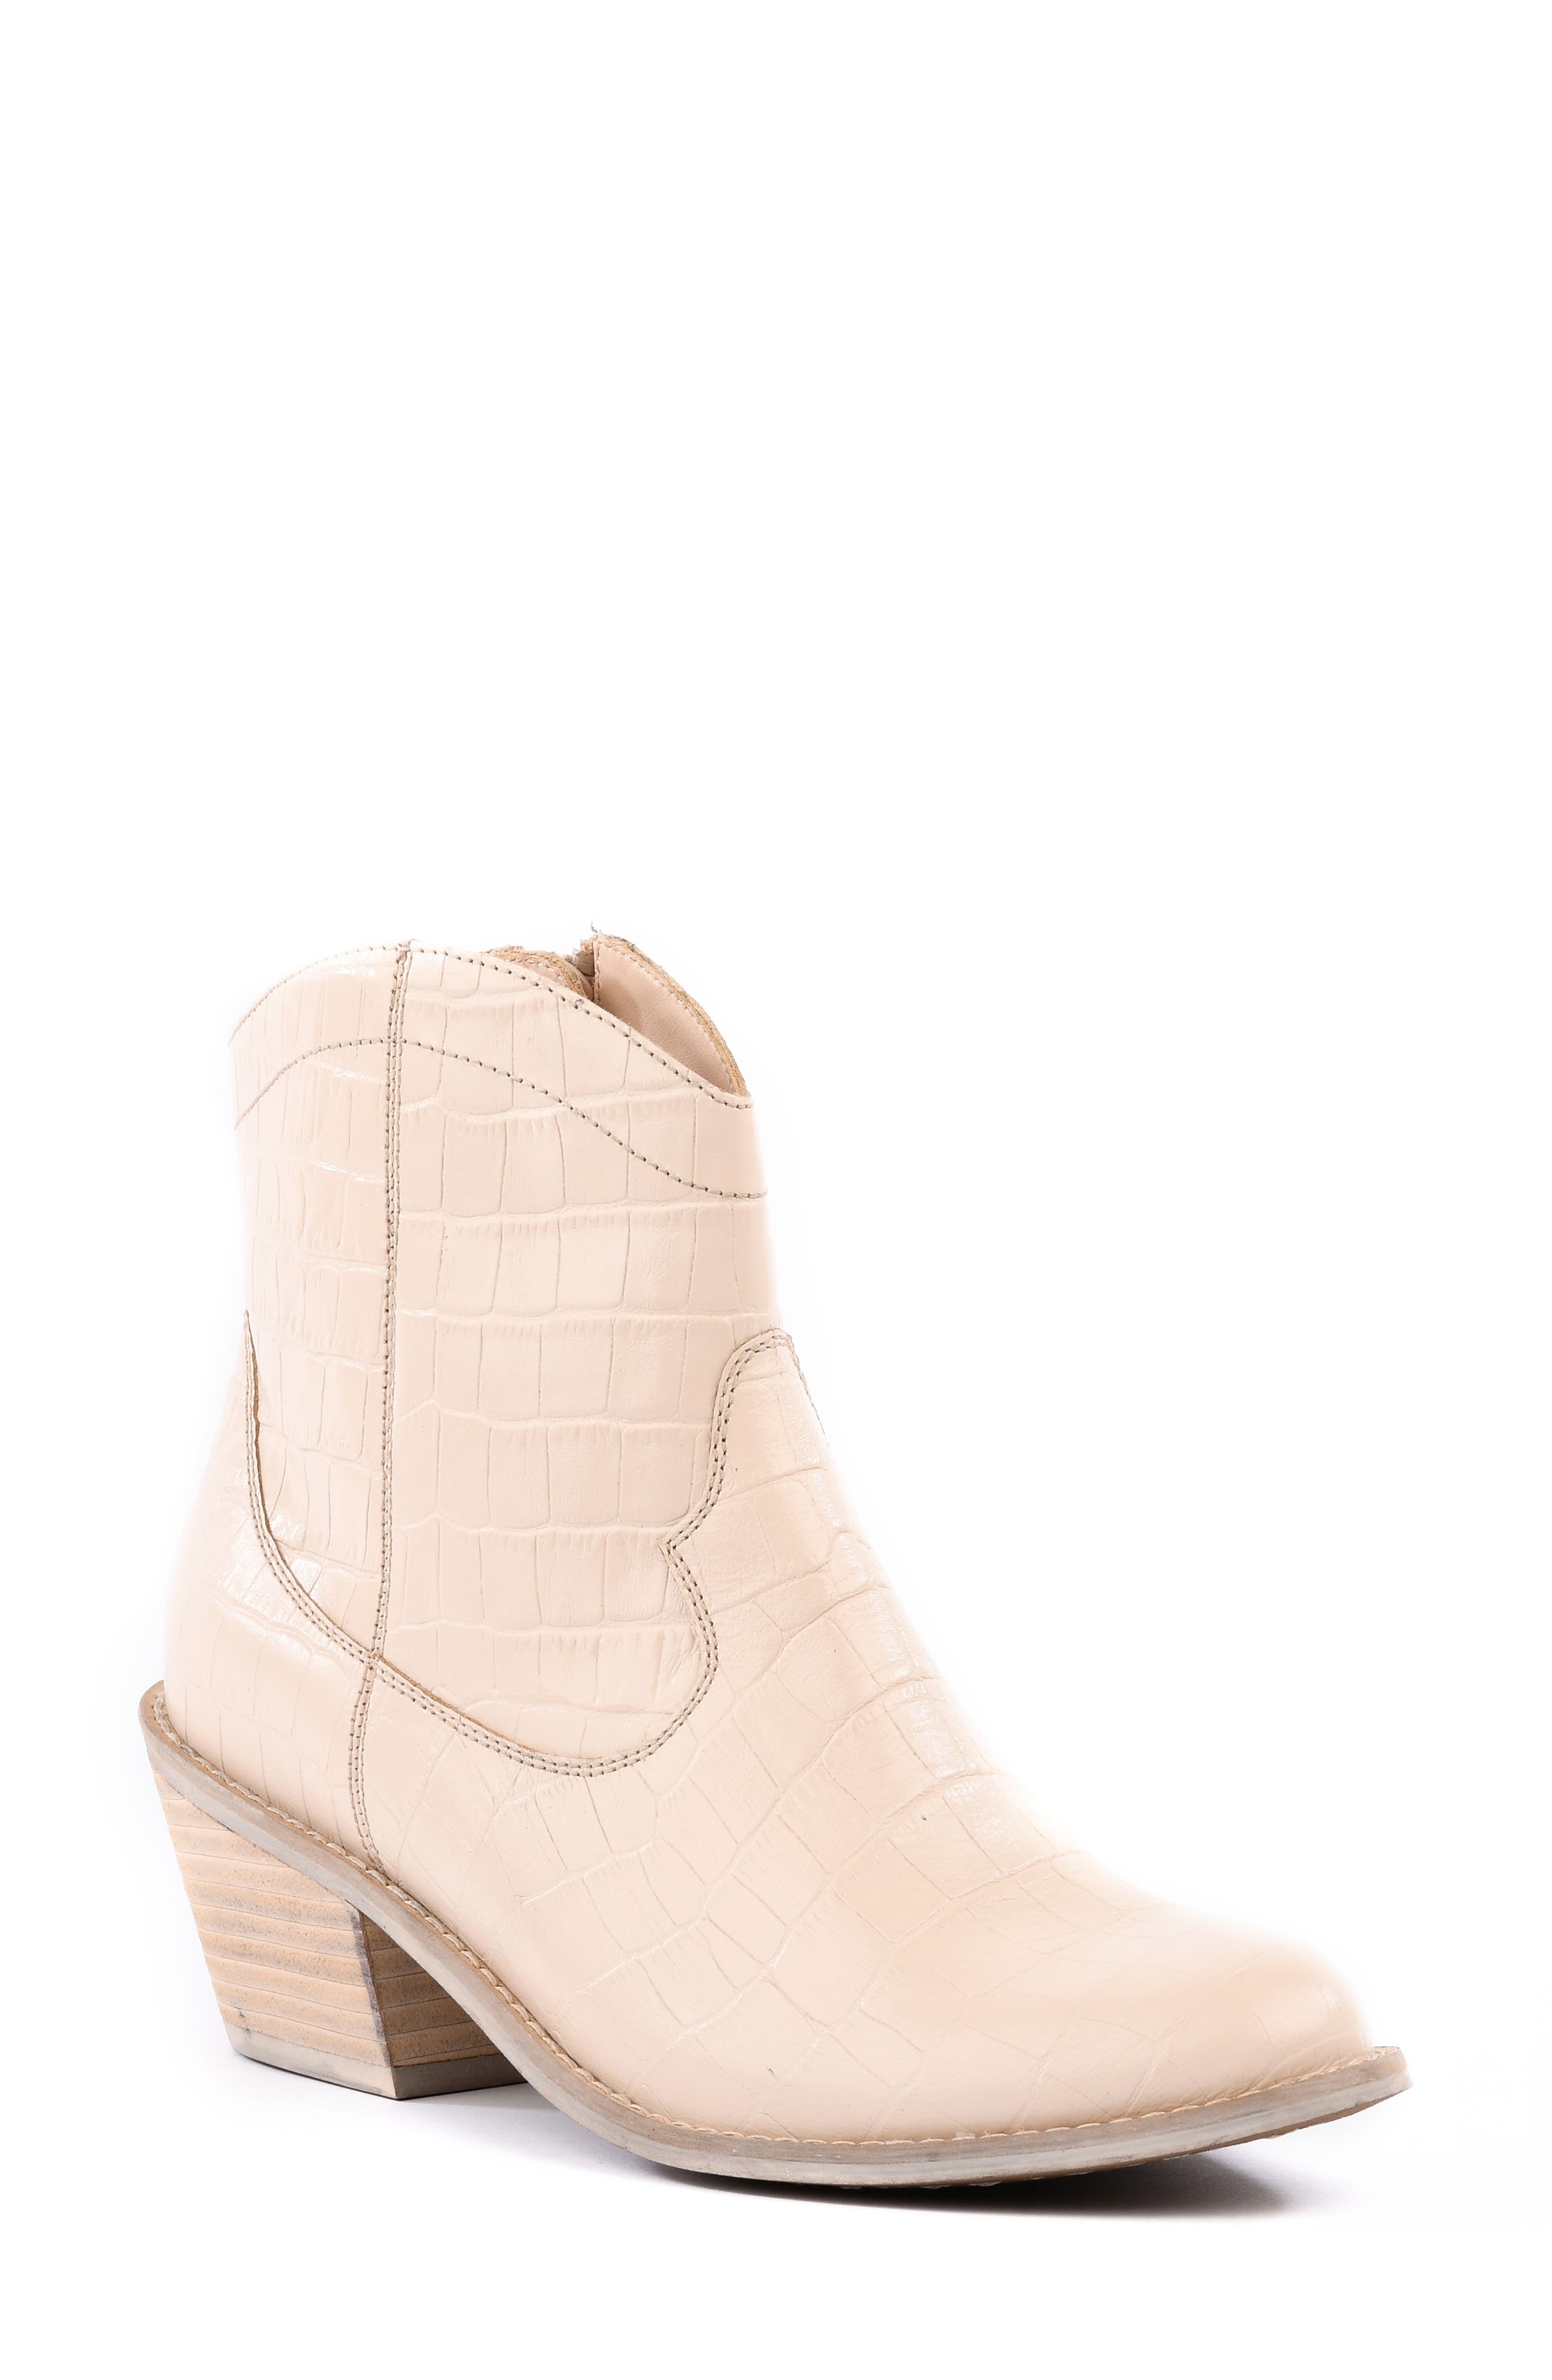 Details about   Seychelles Women's in a Trance Chelsea Boot 